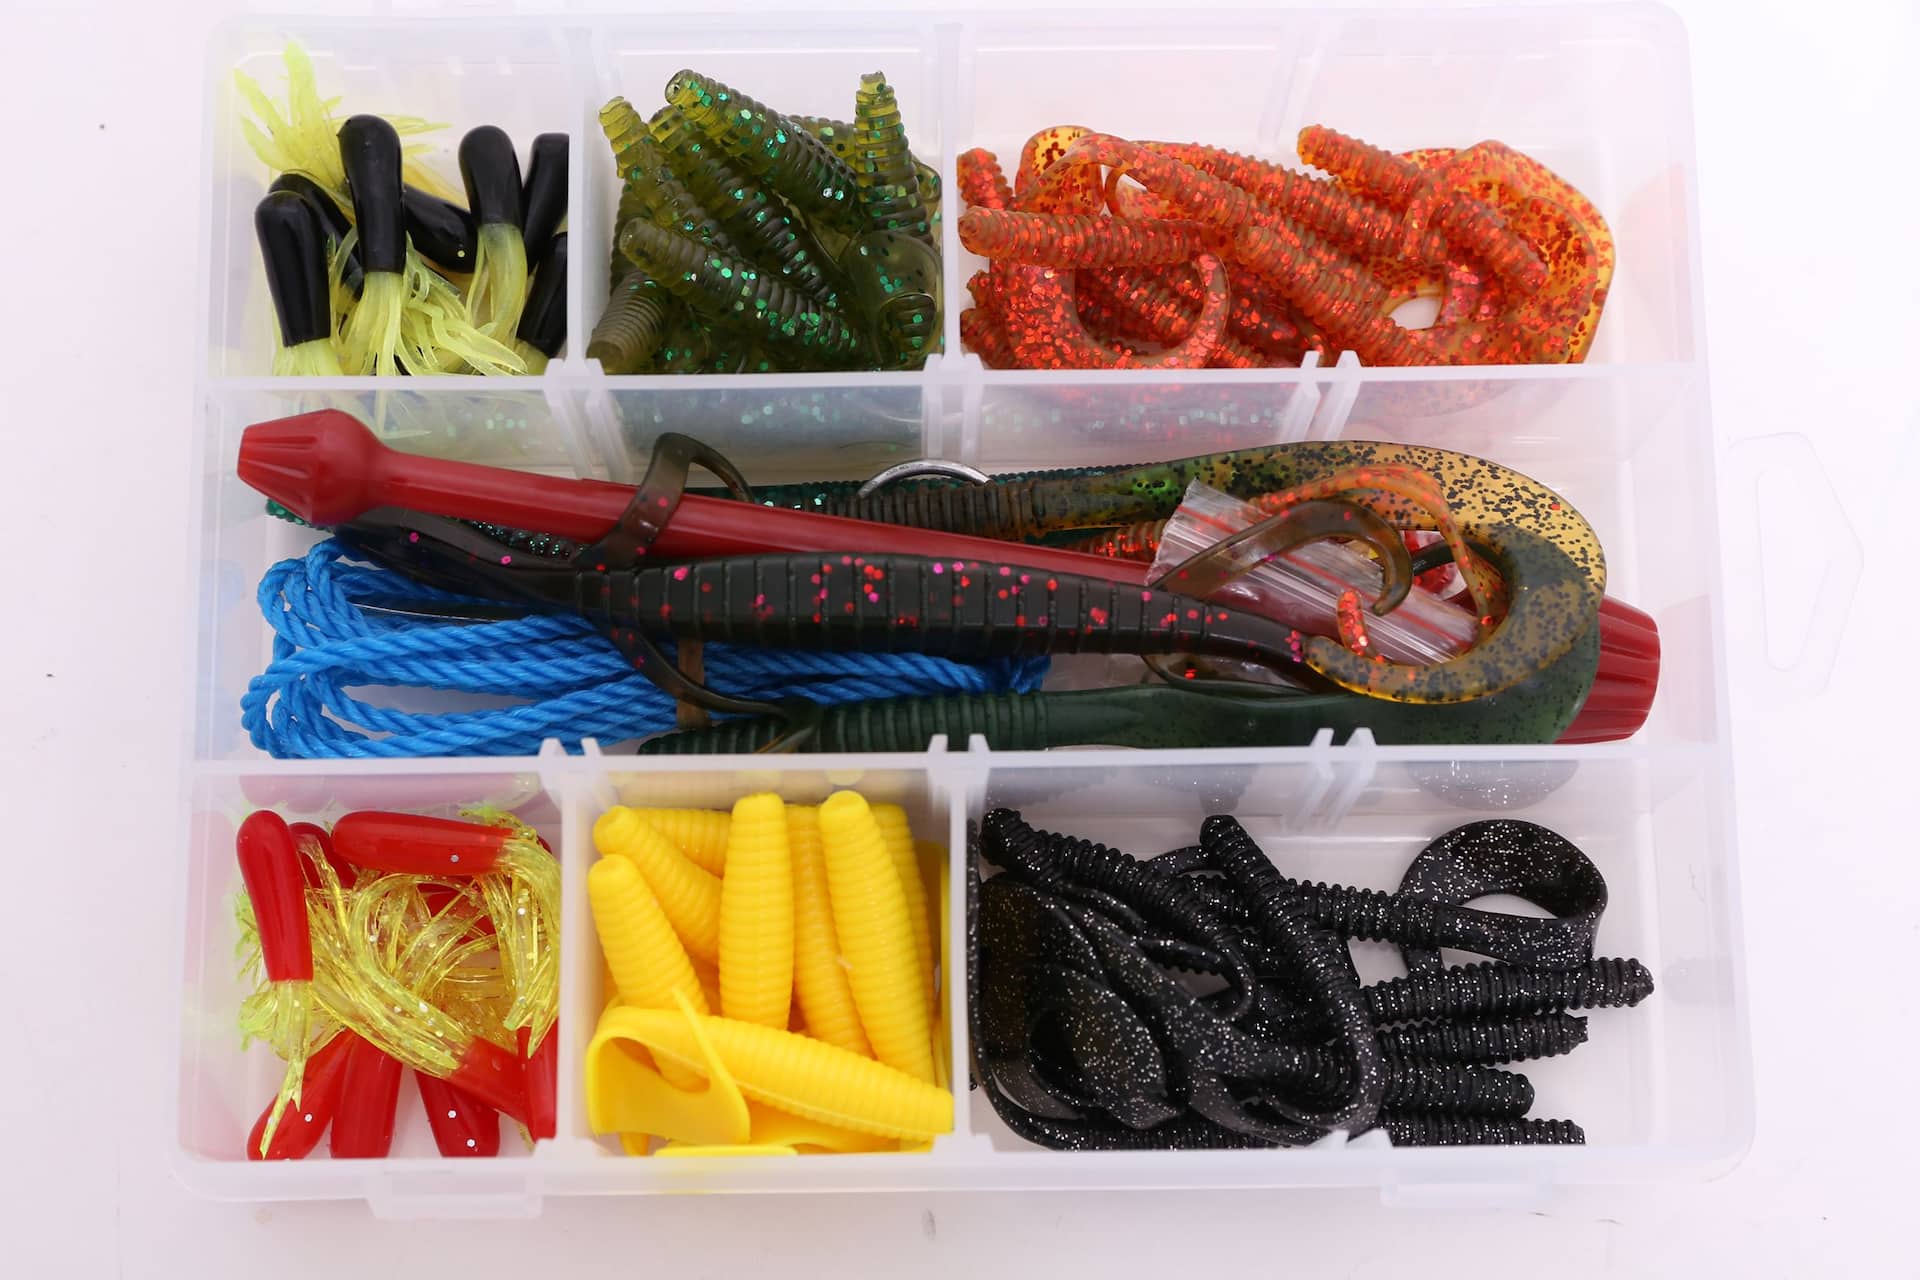 Red Wolf Bass Lure Kit, 120-pc